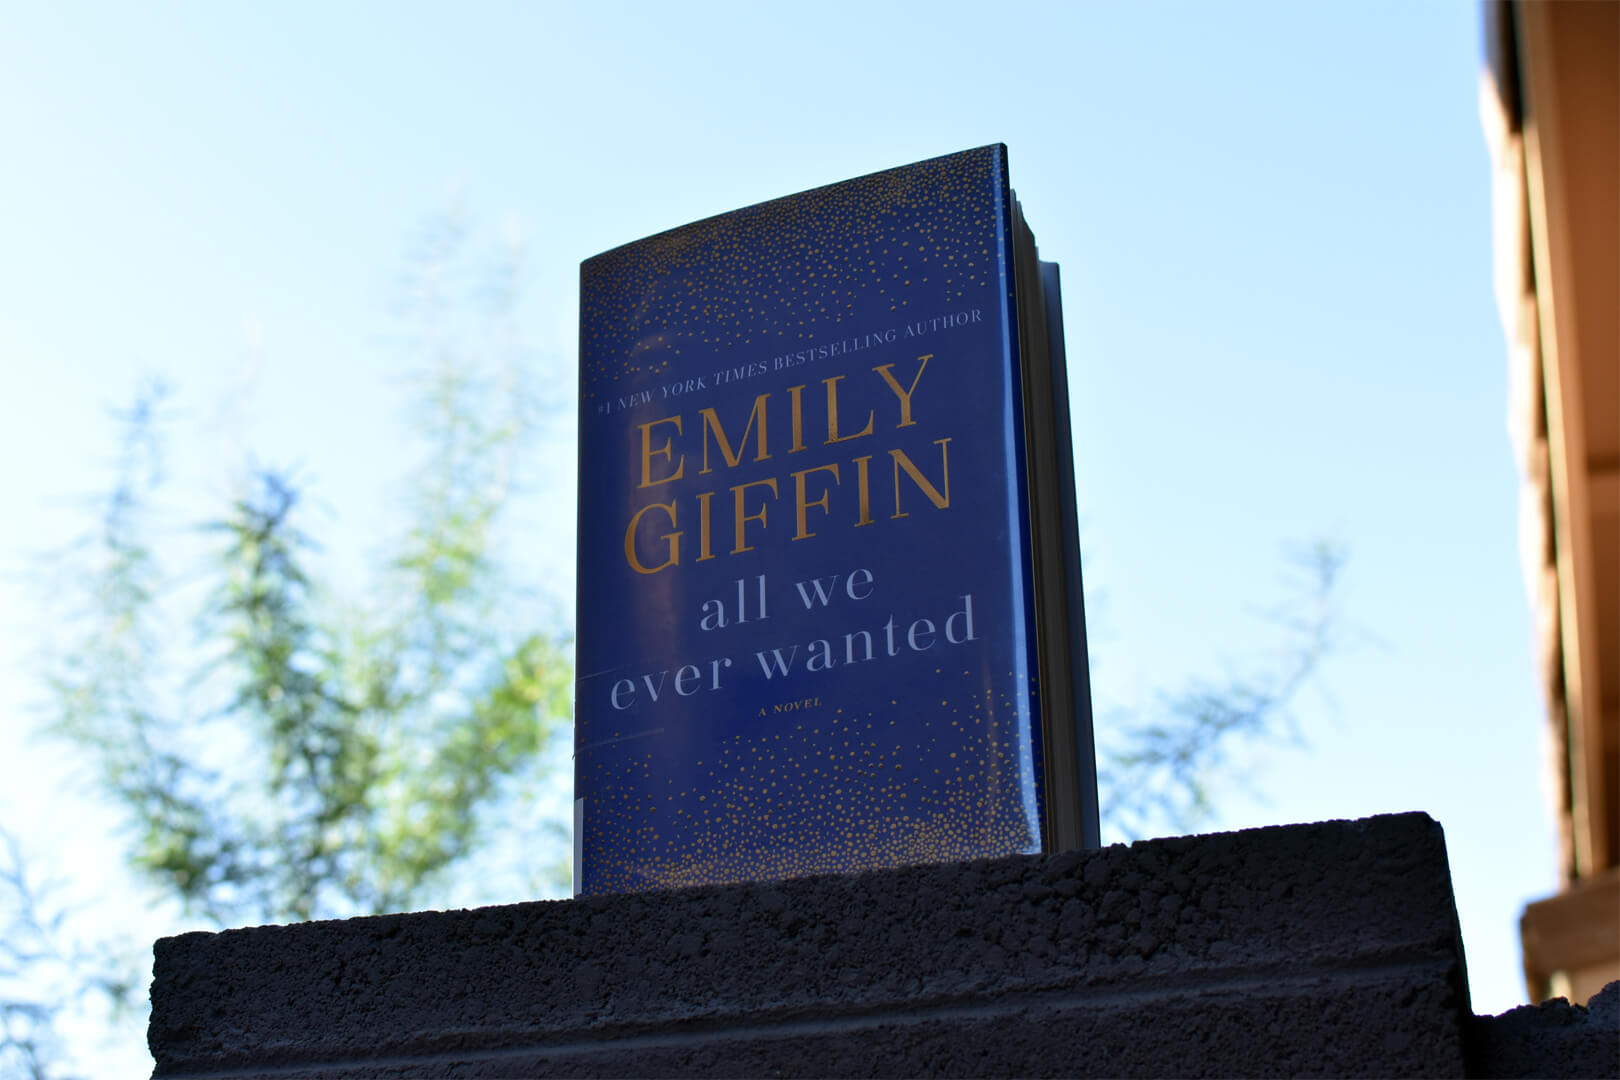 Book Club Questions for All We Ever Wanted by Emily Giffin